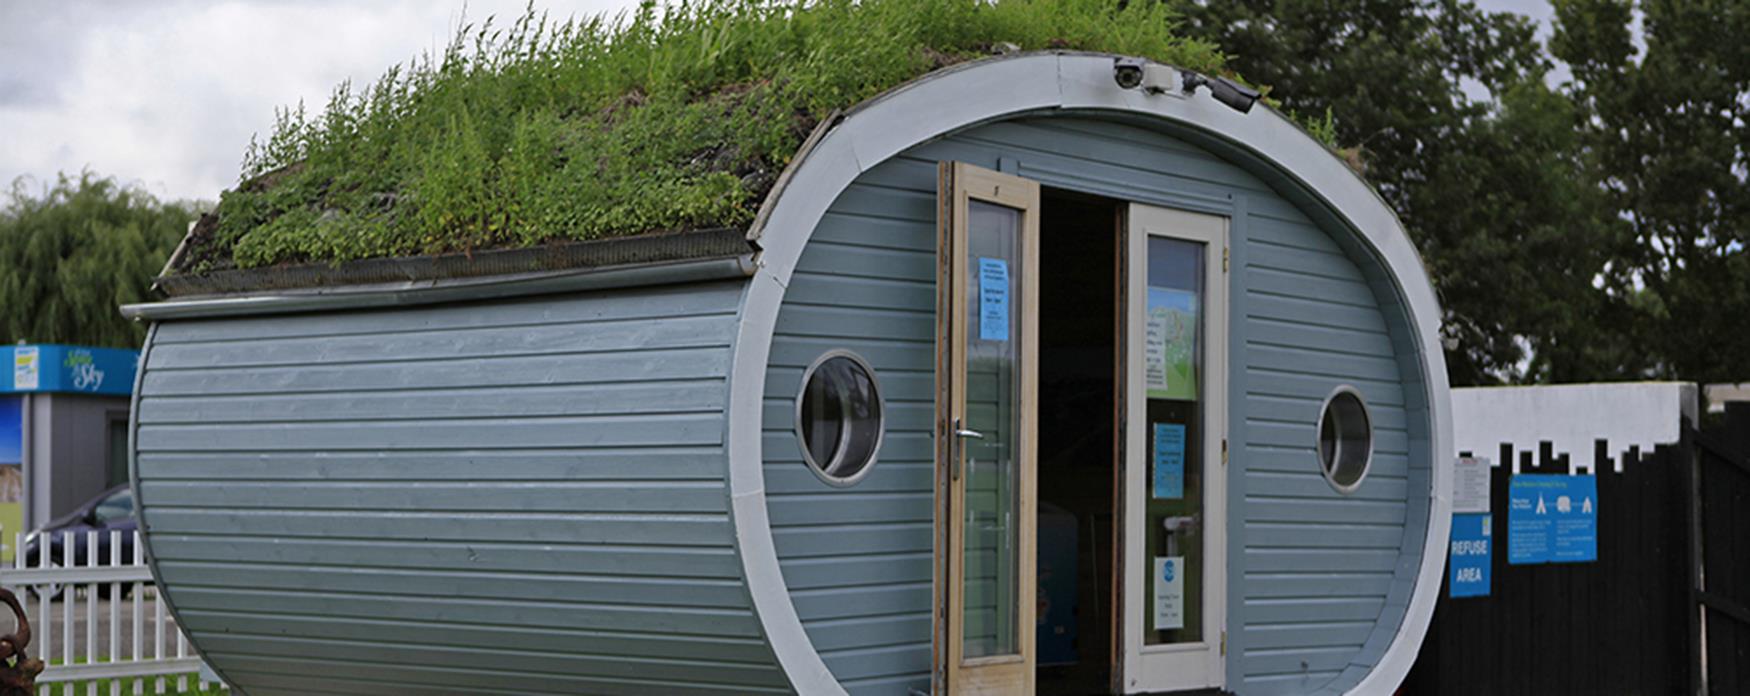 unusual accommodation - grass covered hut - osea leisure park